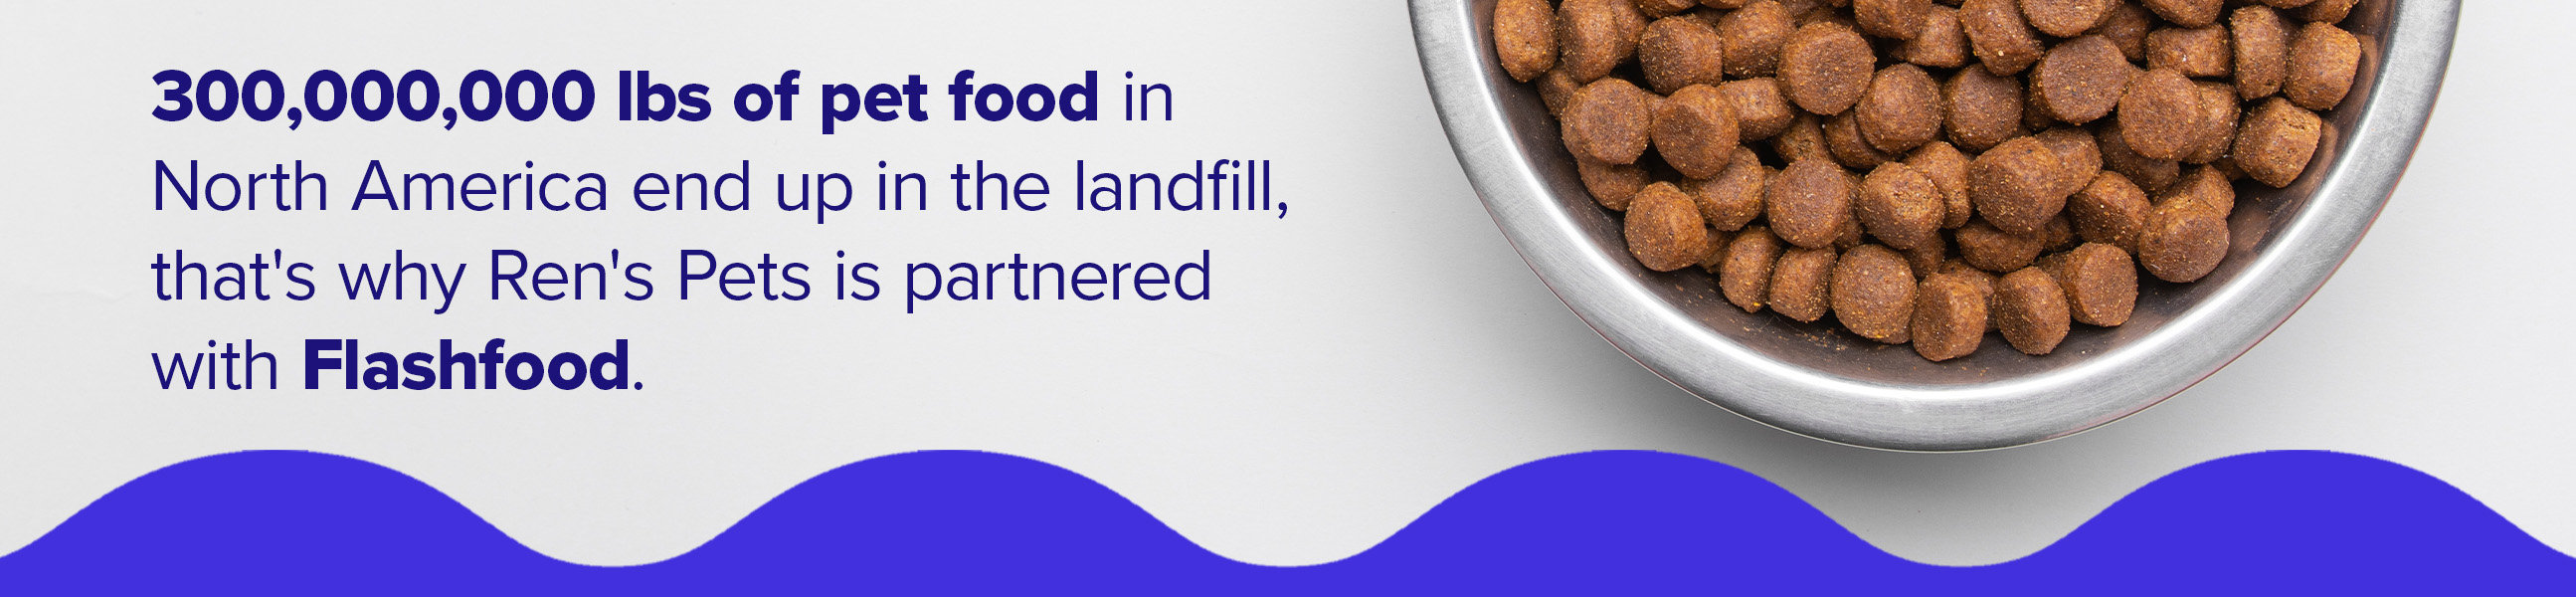 300,000,000 lbs of pet food ends in landfill, that's why we partnered with flashfood